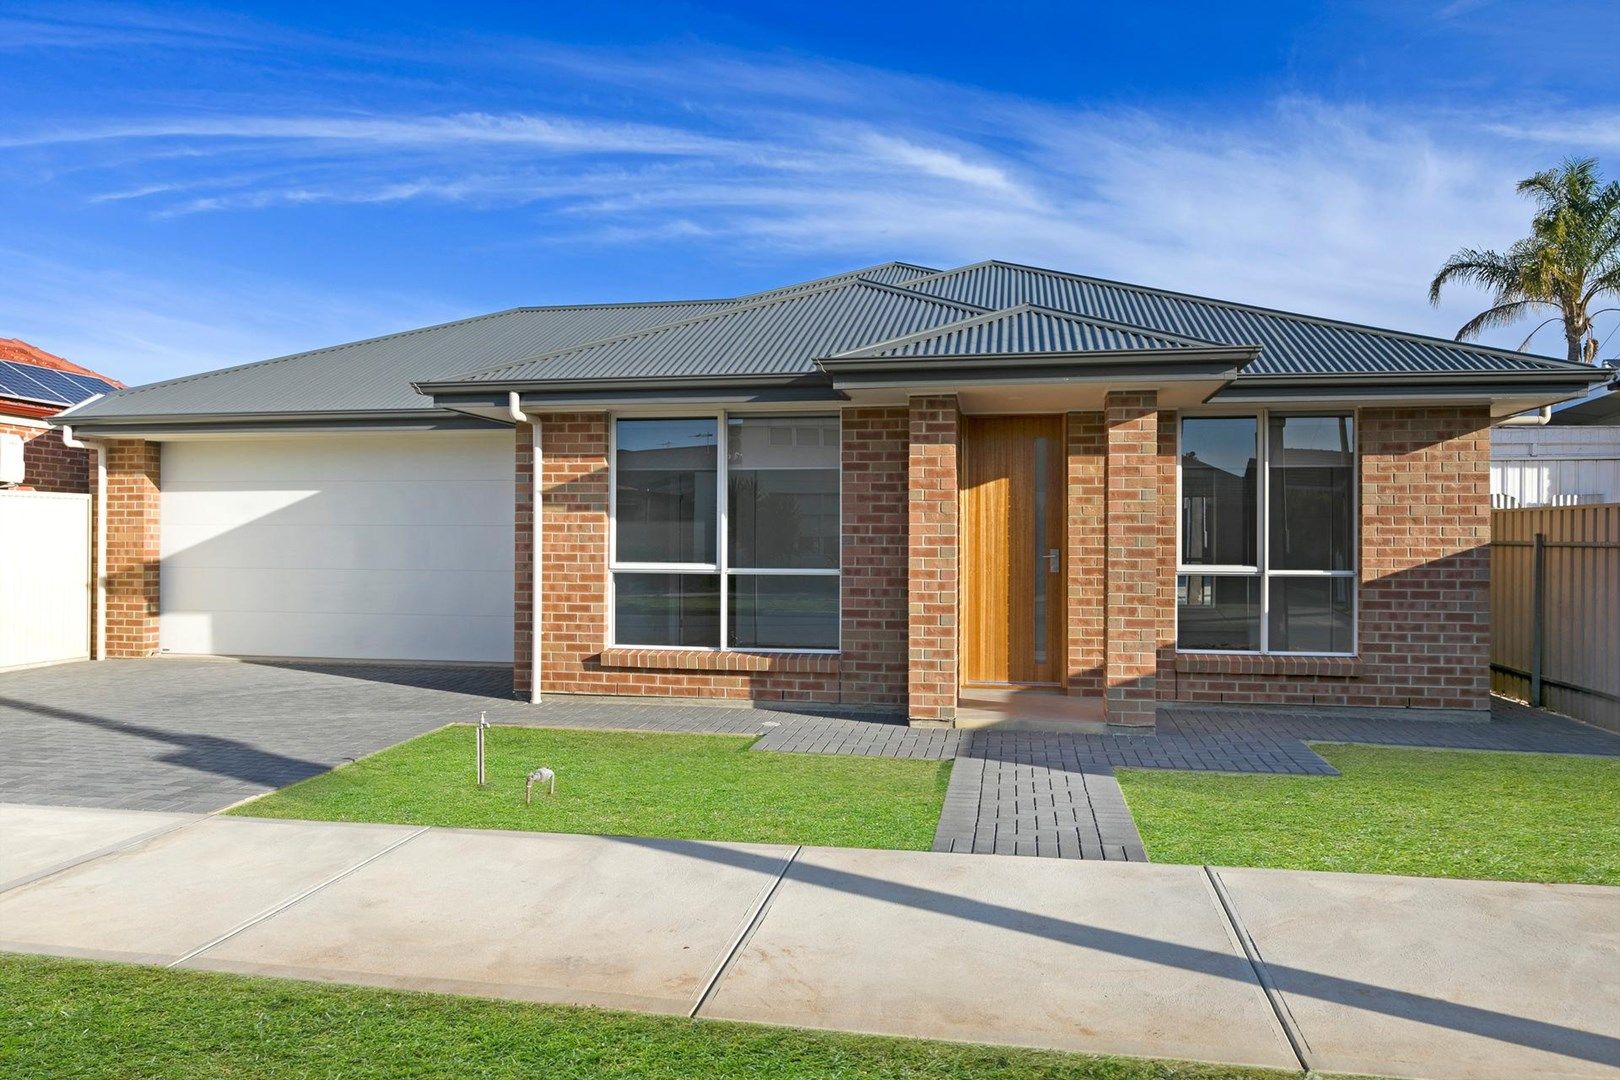 3 bedrooms House in 23B Nelson Ave FLINDERS PARK SA, 5025